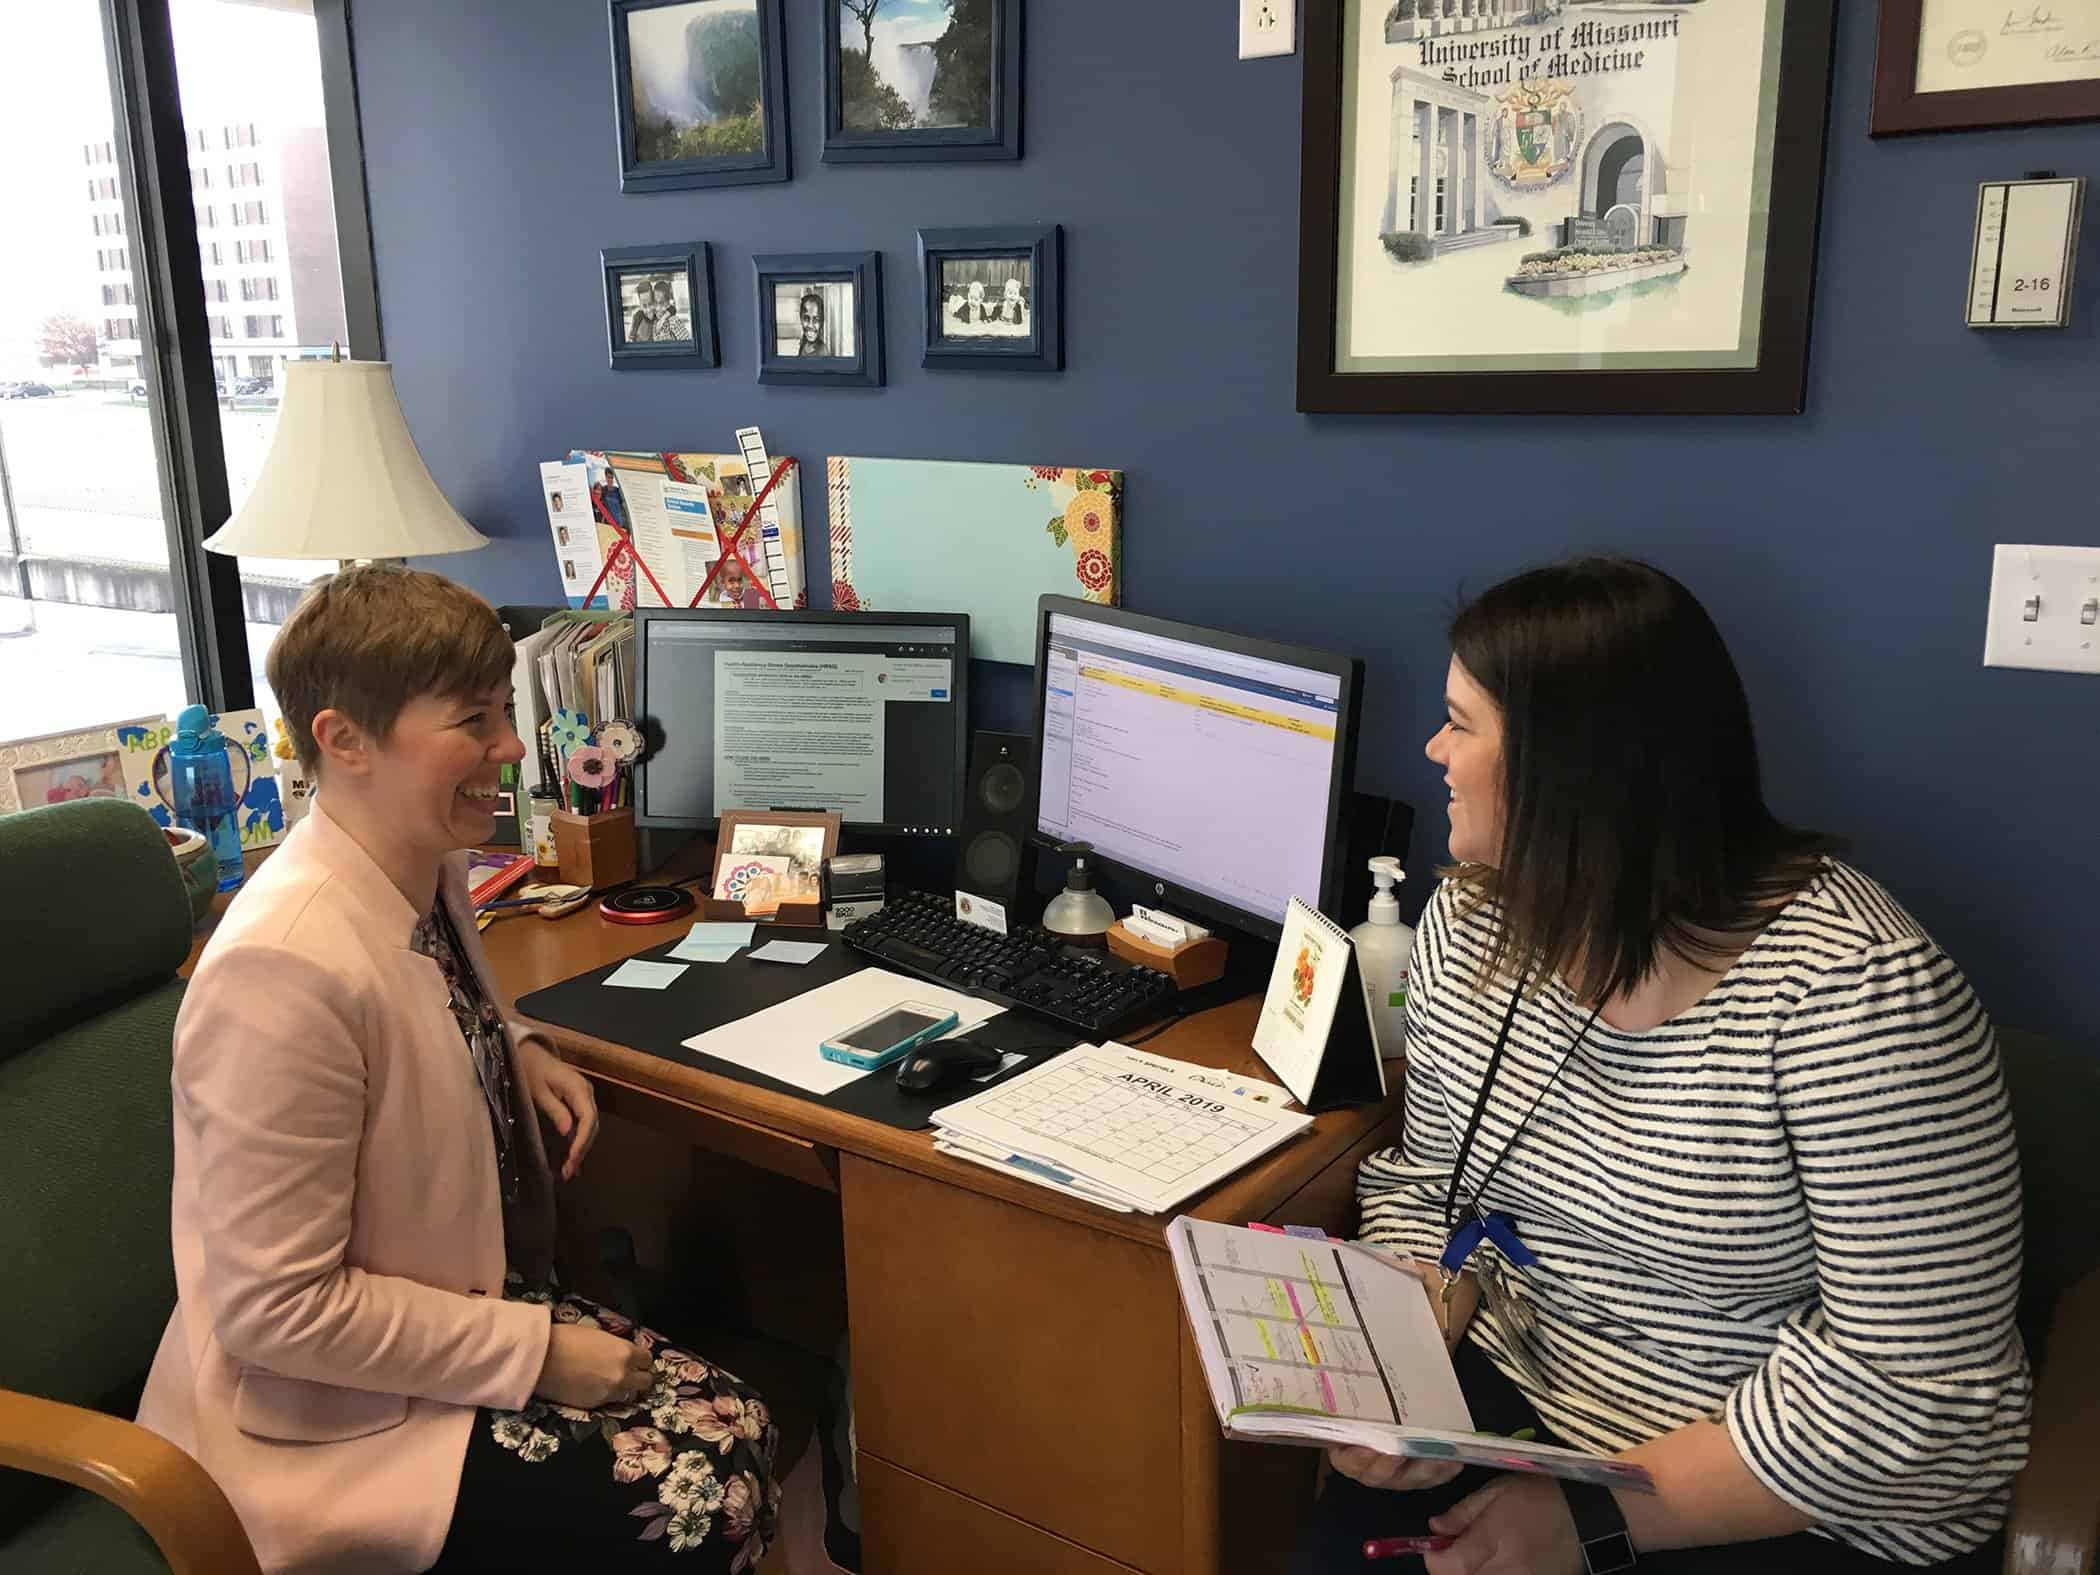 Pediatrician Dr. Kelly Wright (left) discusses parenting tactics with Amanda Coleman, a parent educator in the Springfield Parents as Teachers home visiting program. Coleman is embedded in the clinical setting at Cox North Pediatrics.